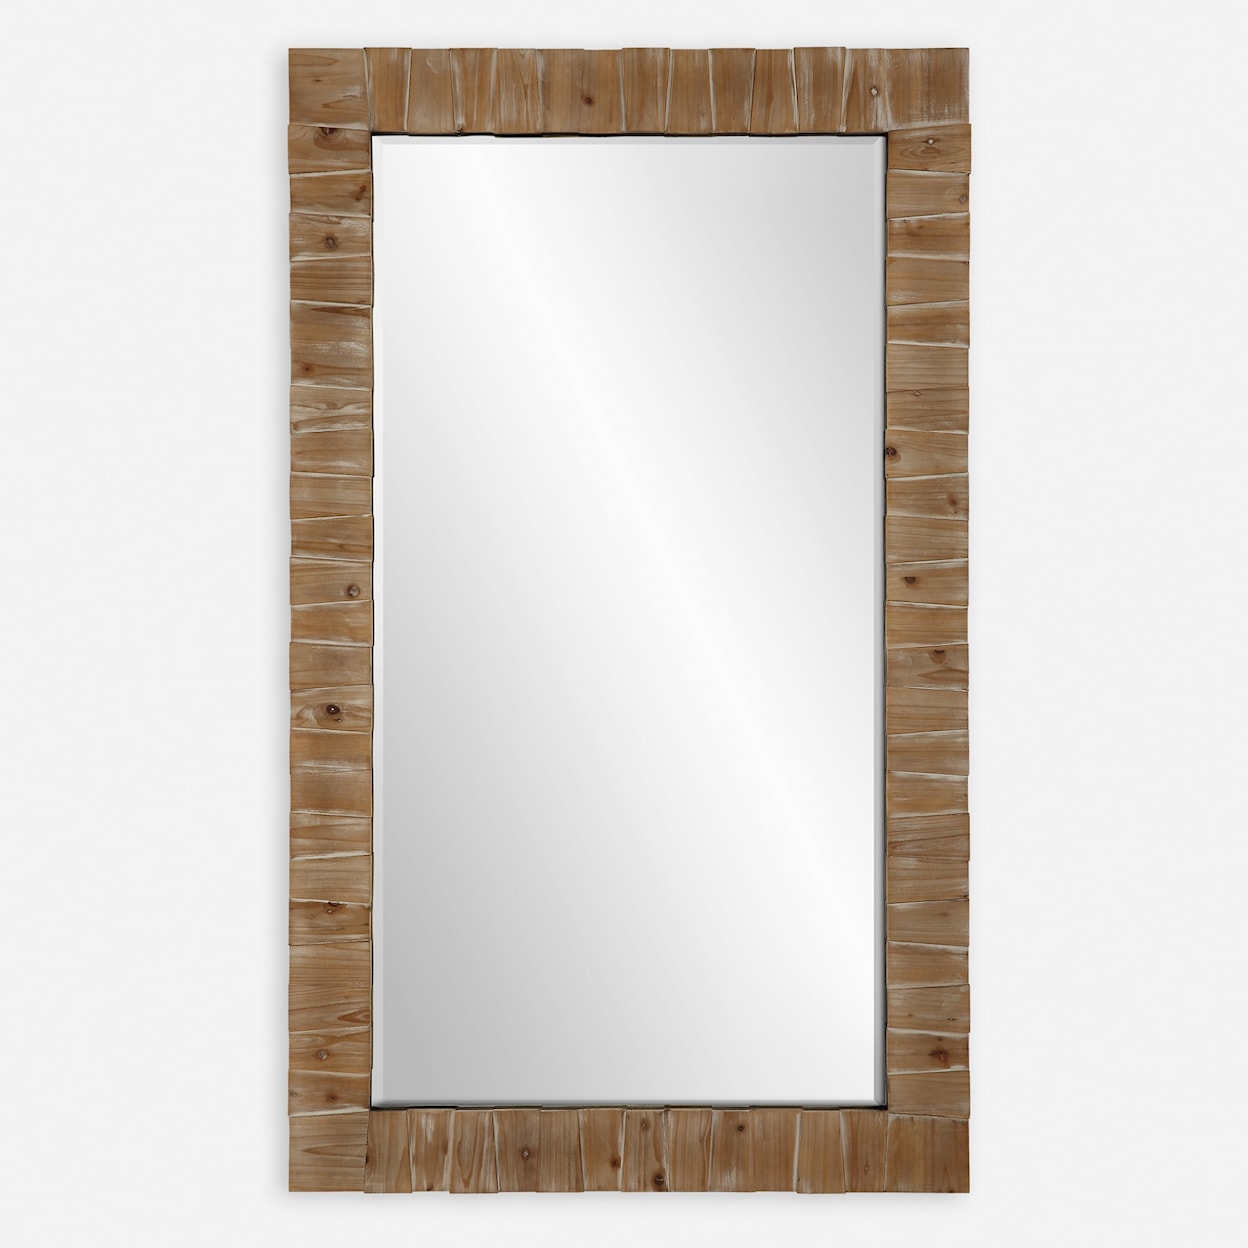 Uttermost Ayanna Ayanna Gray Washed Wood Mirror